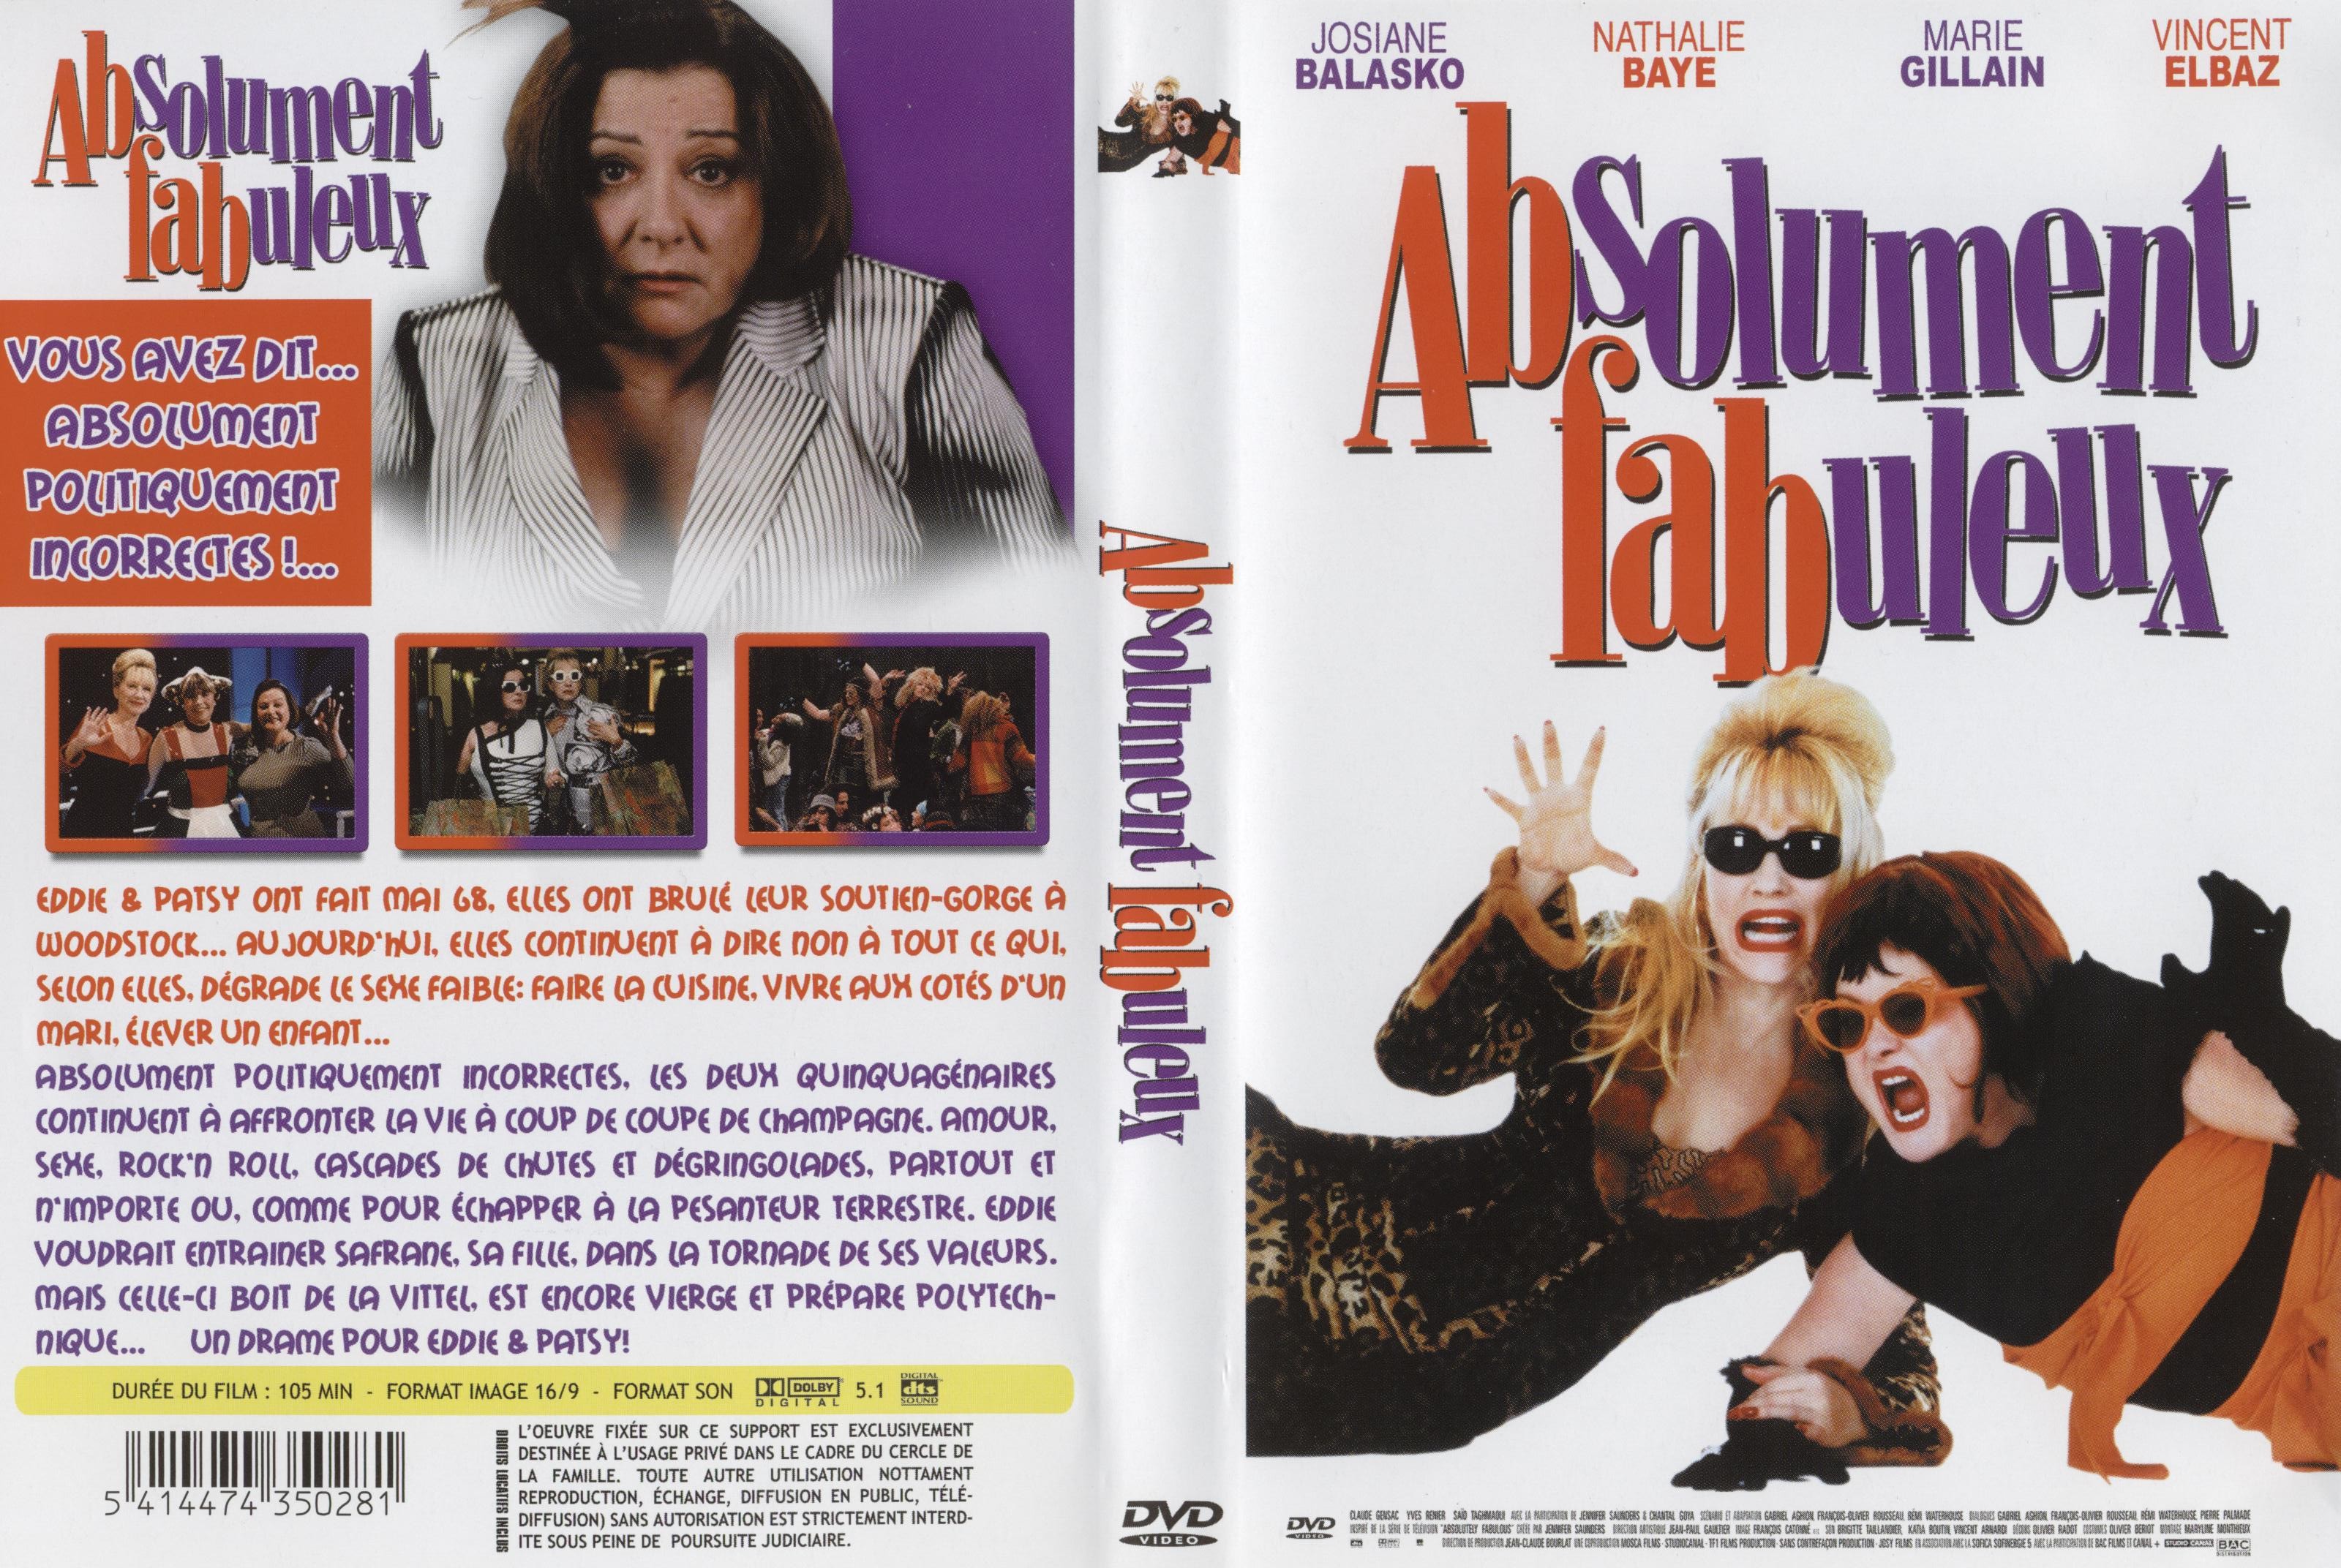 Jaquette DVD Absolument fabuleux v2